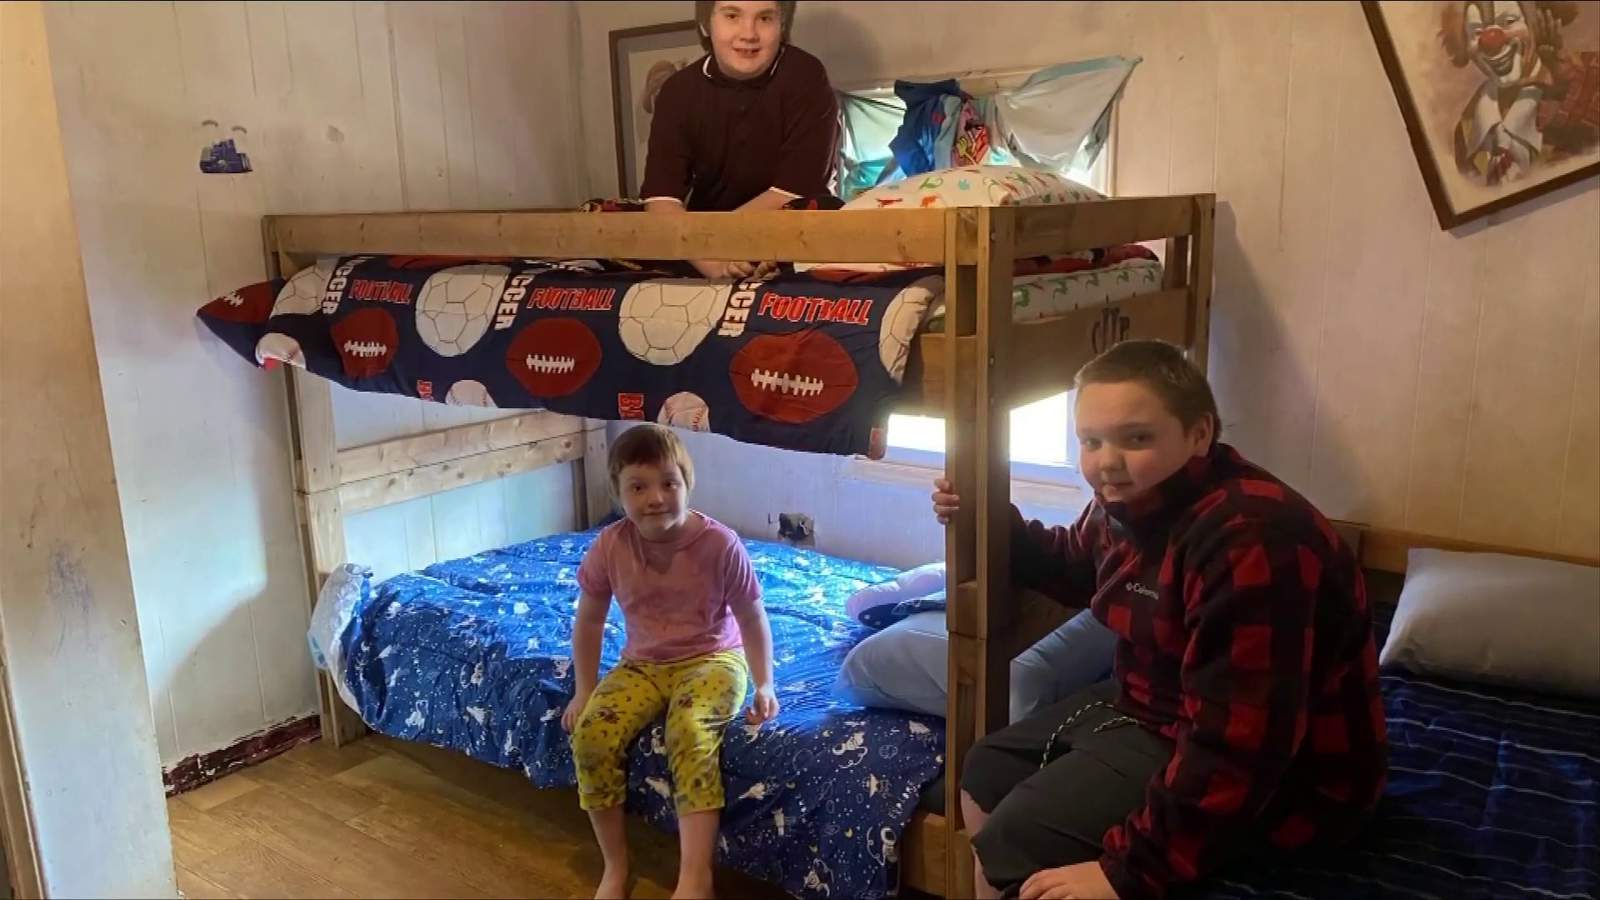 NRV non-profit which builds and donates beds for children runs out of materials